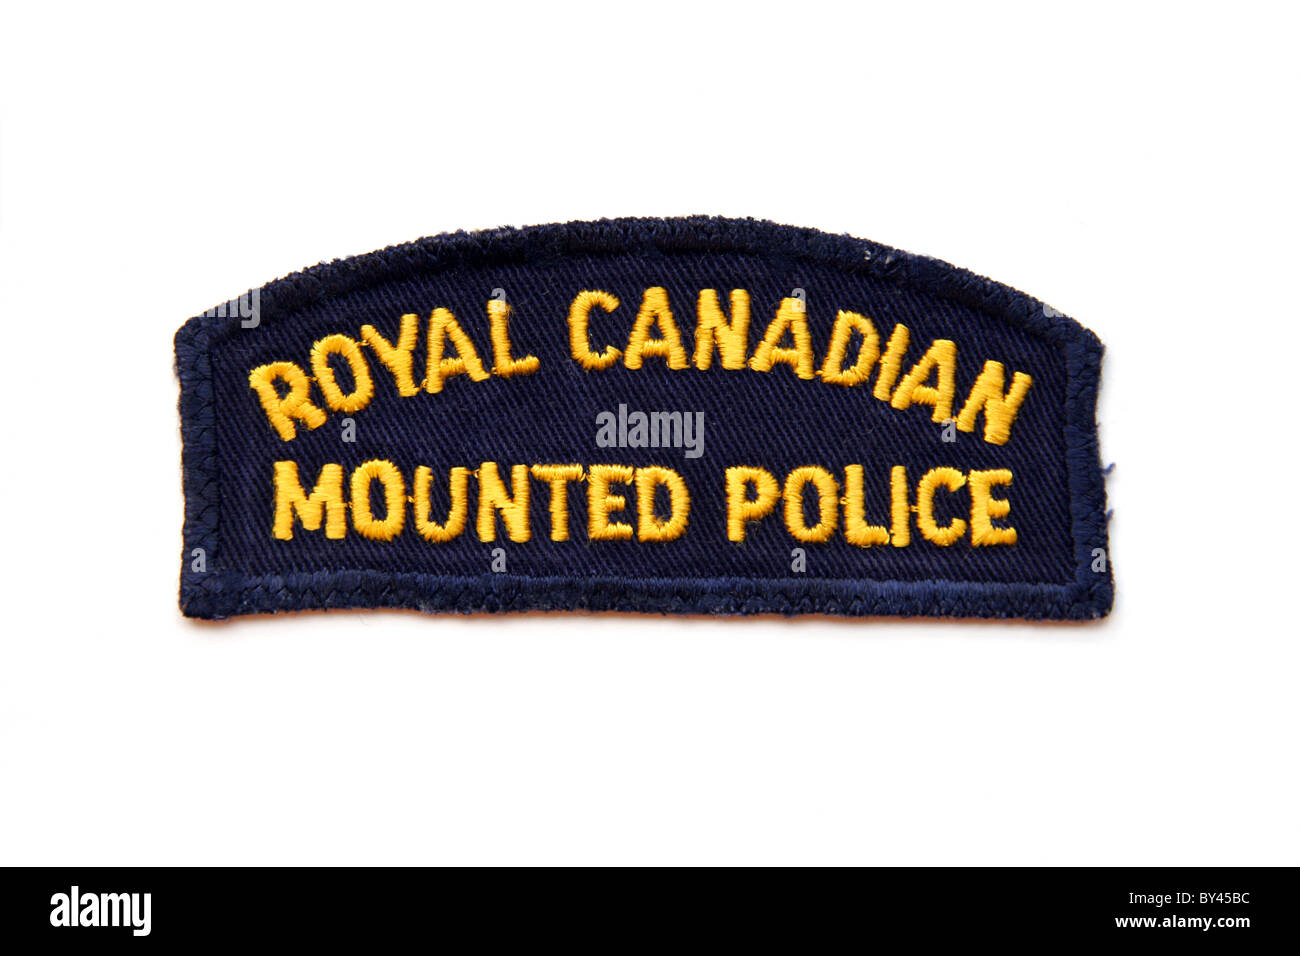 RCMP Royal Canadian Mounted Police patch Stock Photo